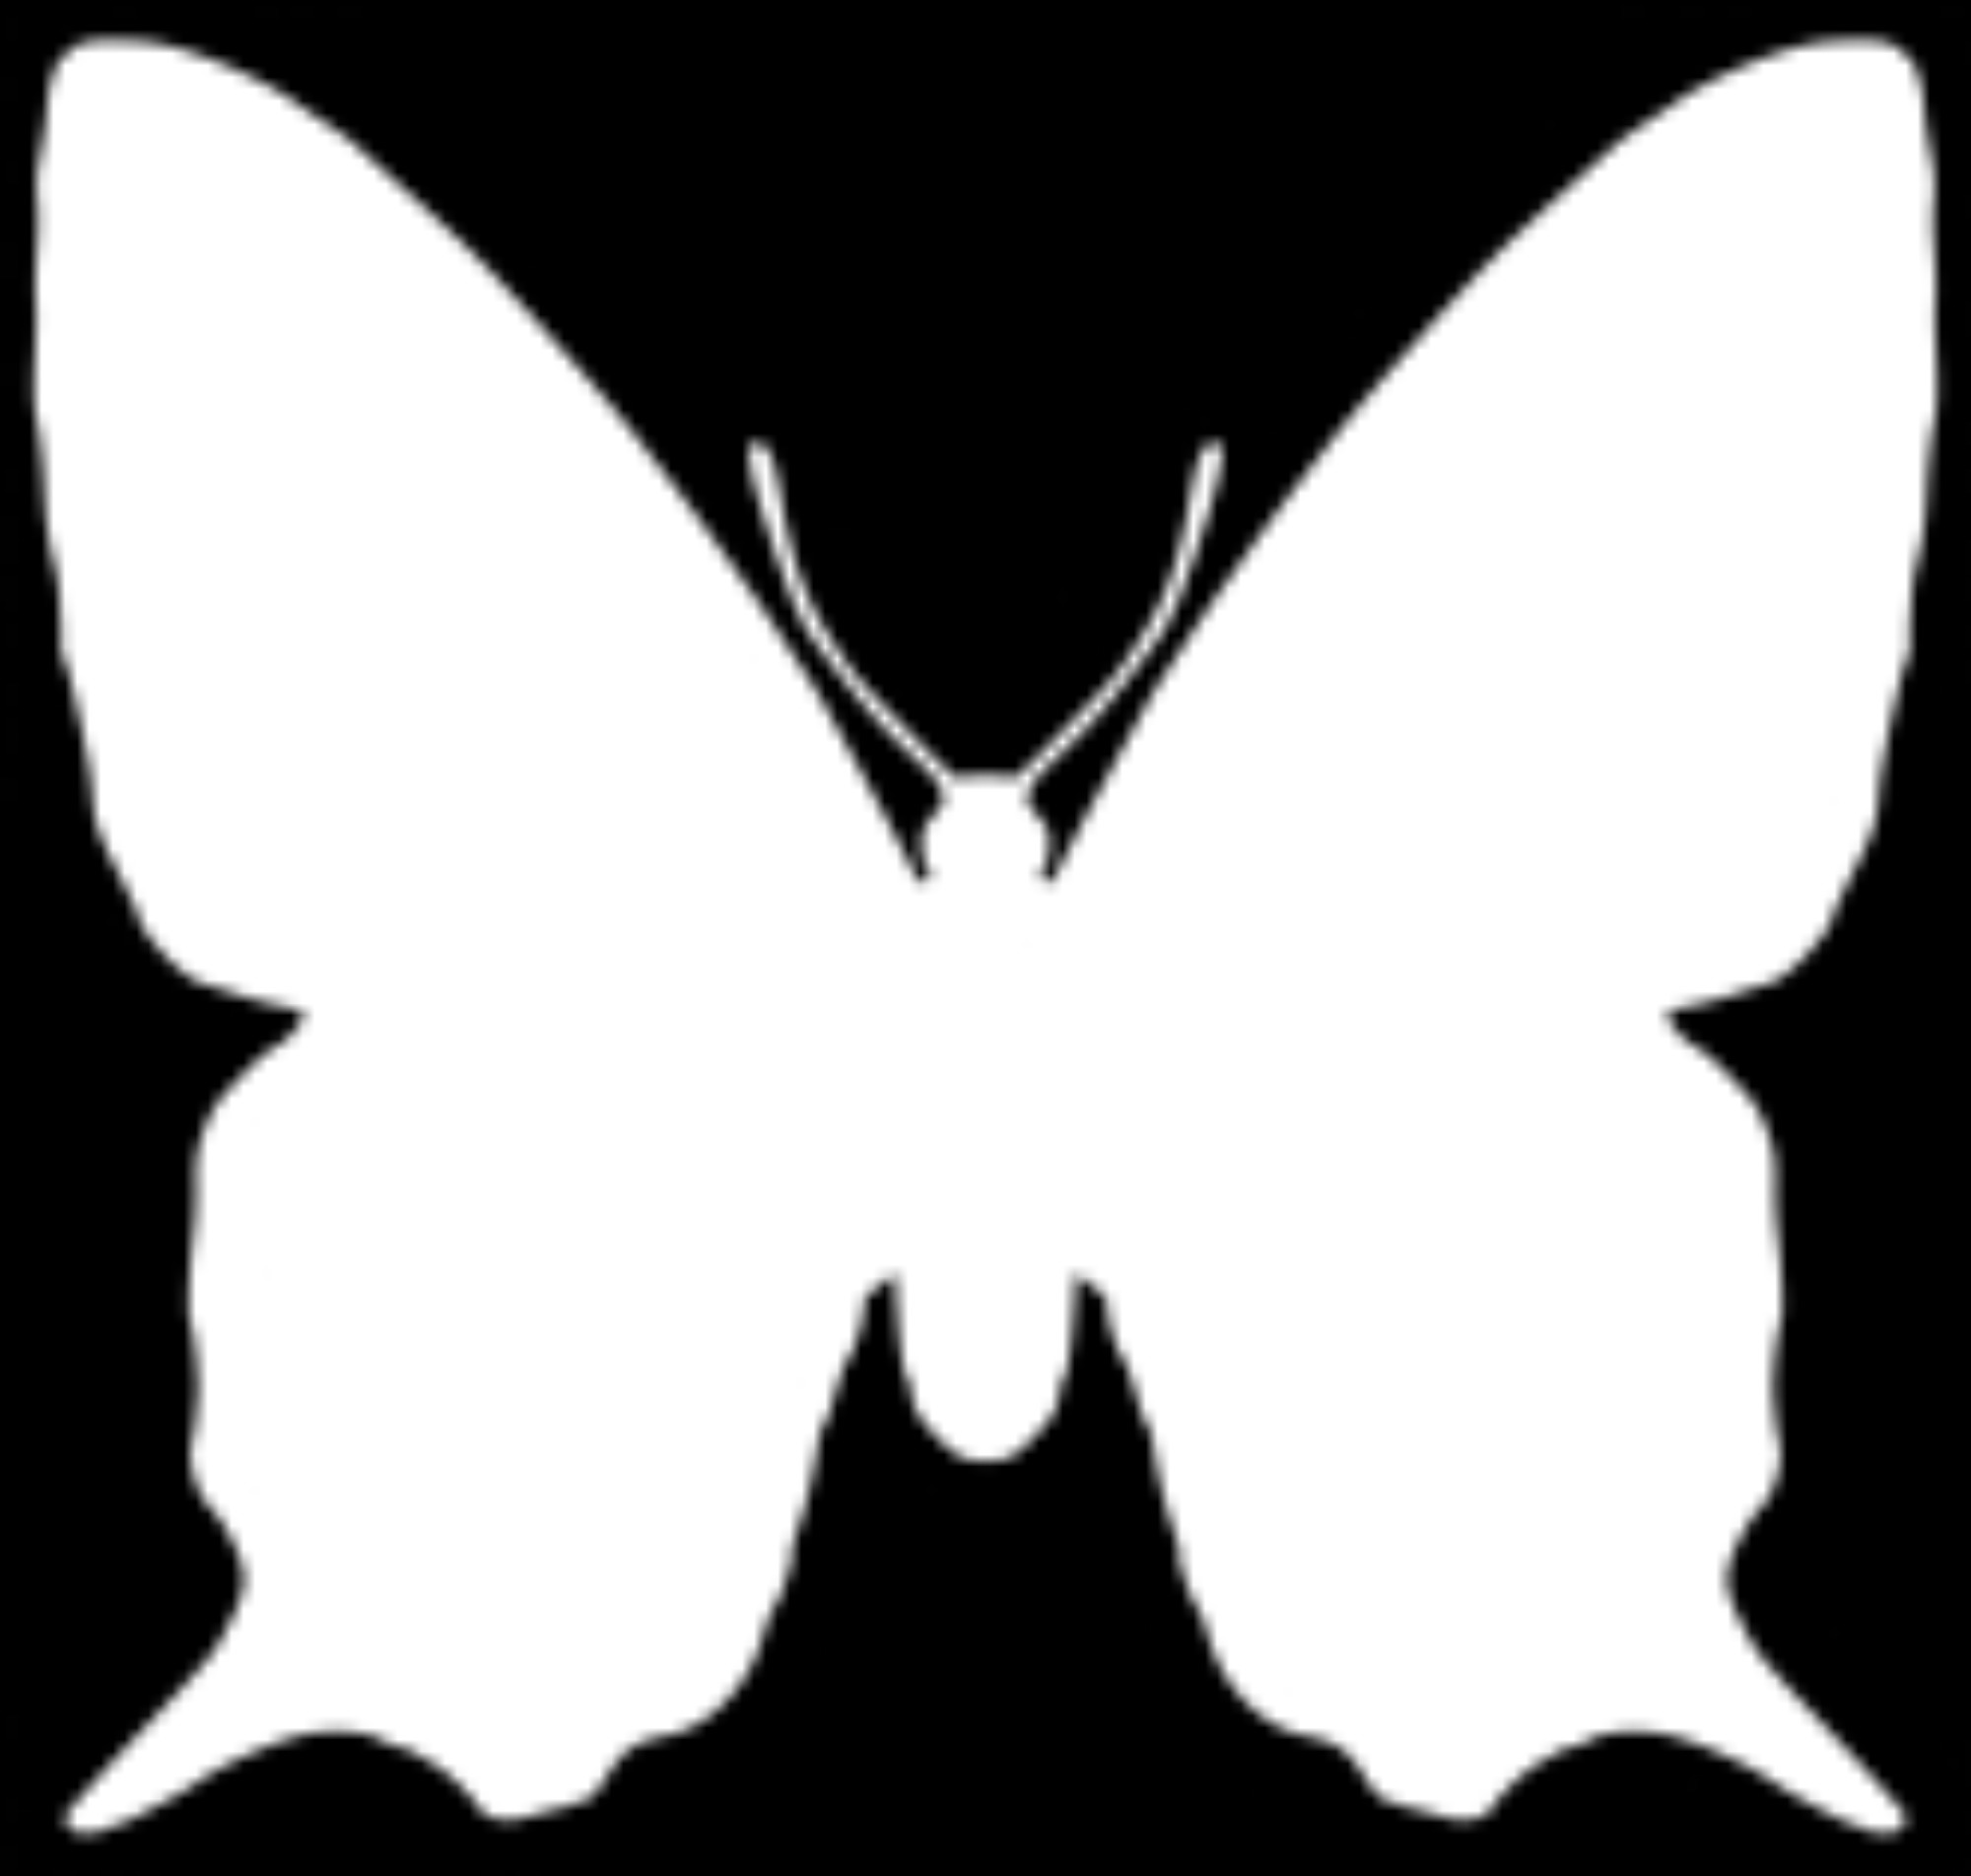 inverted butterfly silhouette - polyvore clippingg? Photo 